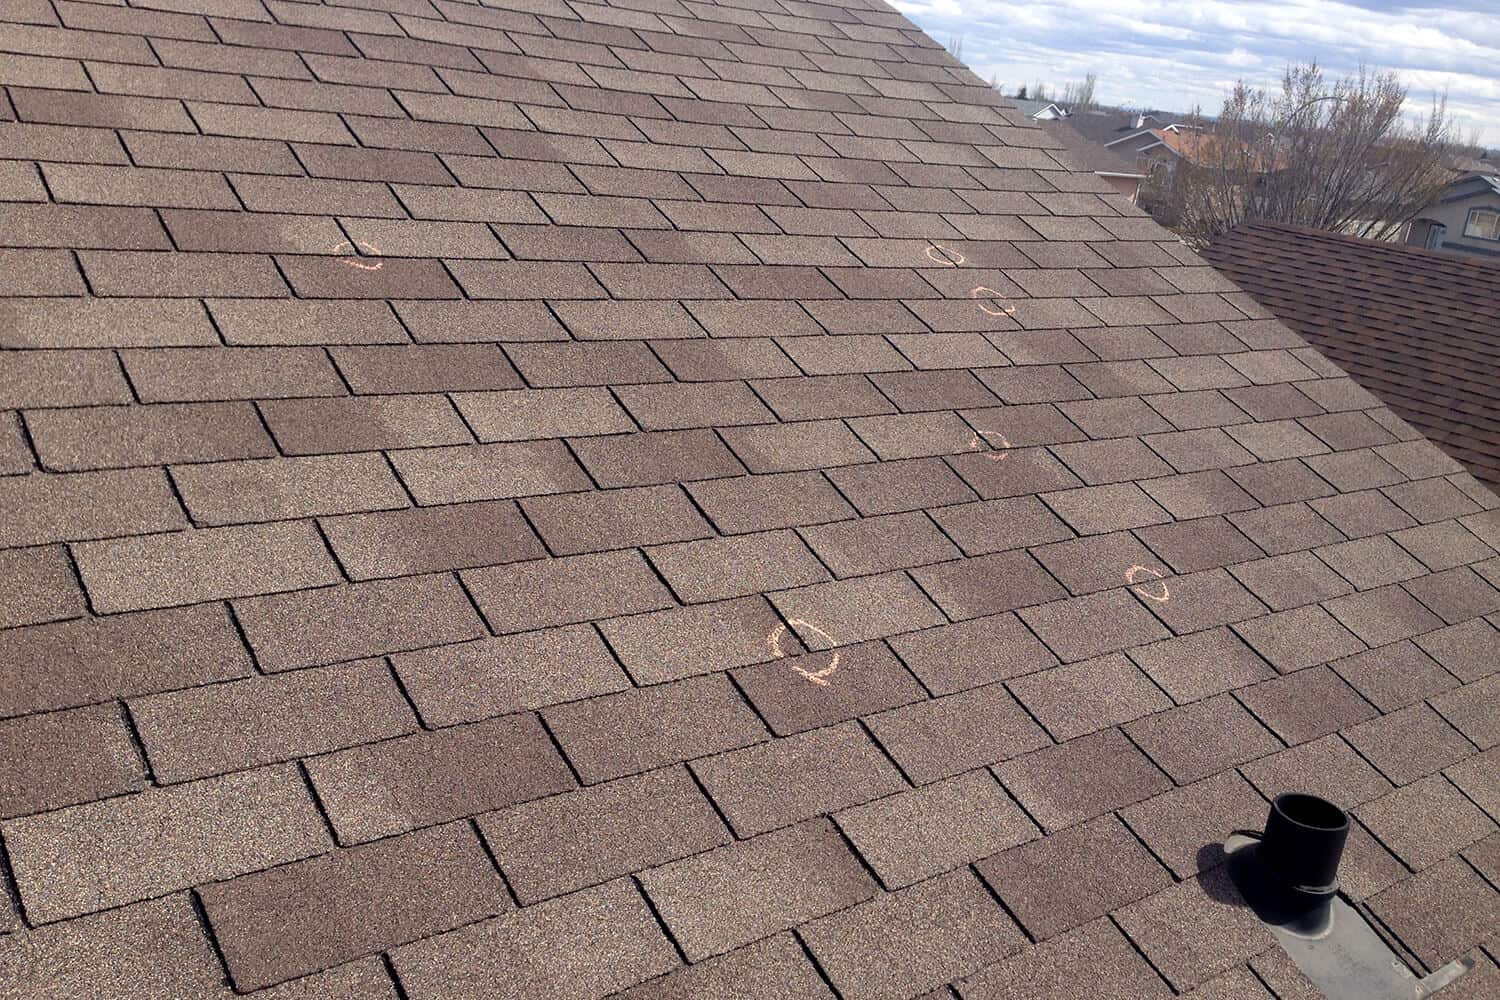 Roof inspection reveals a close up of an asphalt roof with indications of broken shingles and poor nail-head placement circled